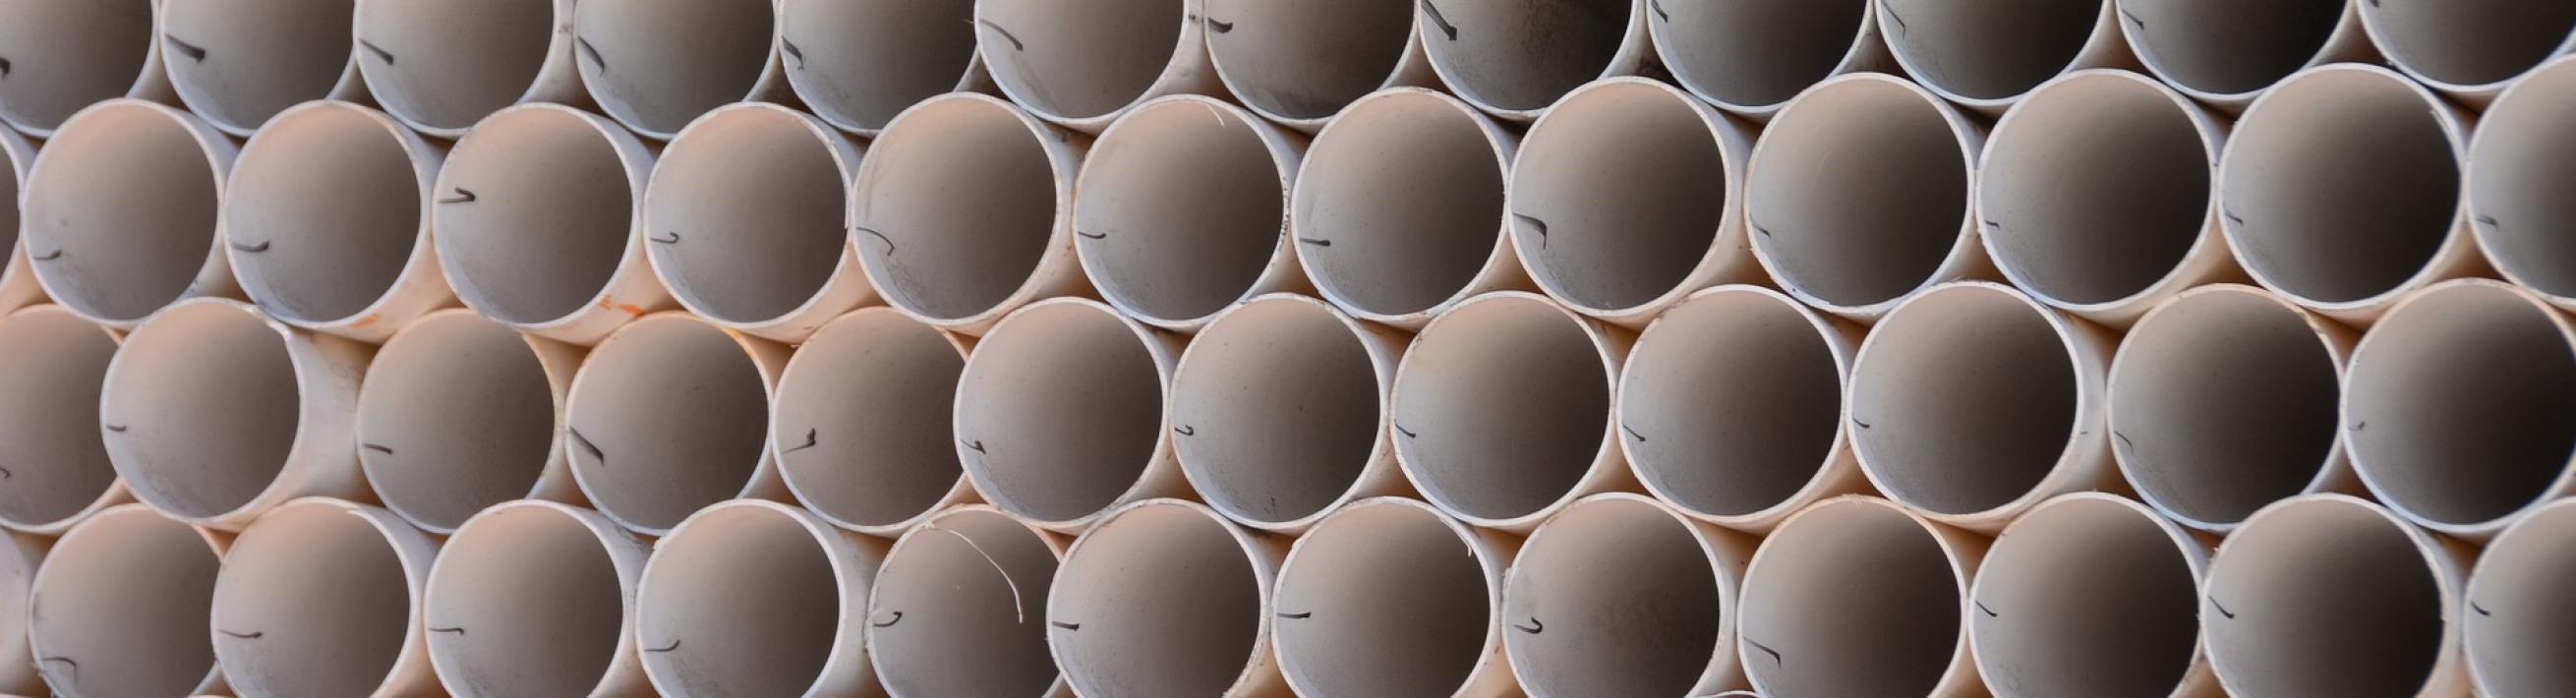 stacked PVC pipe 